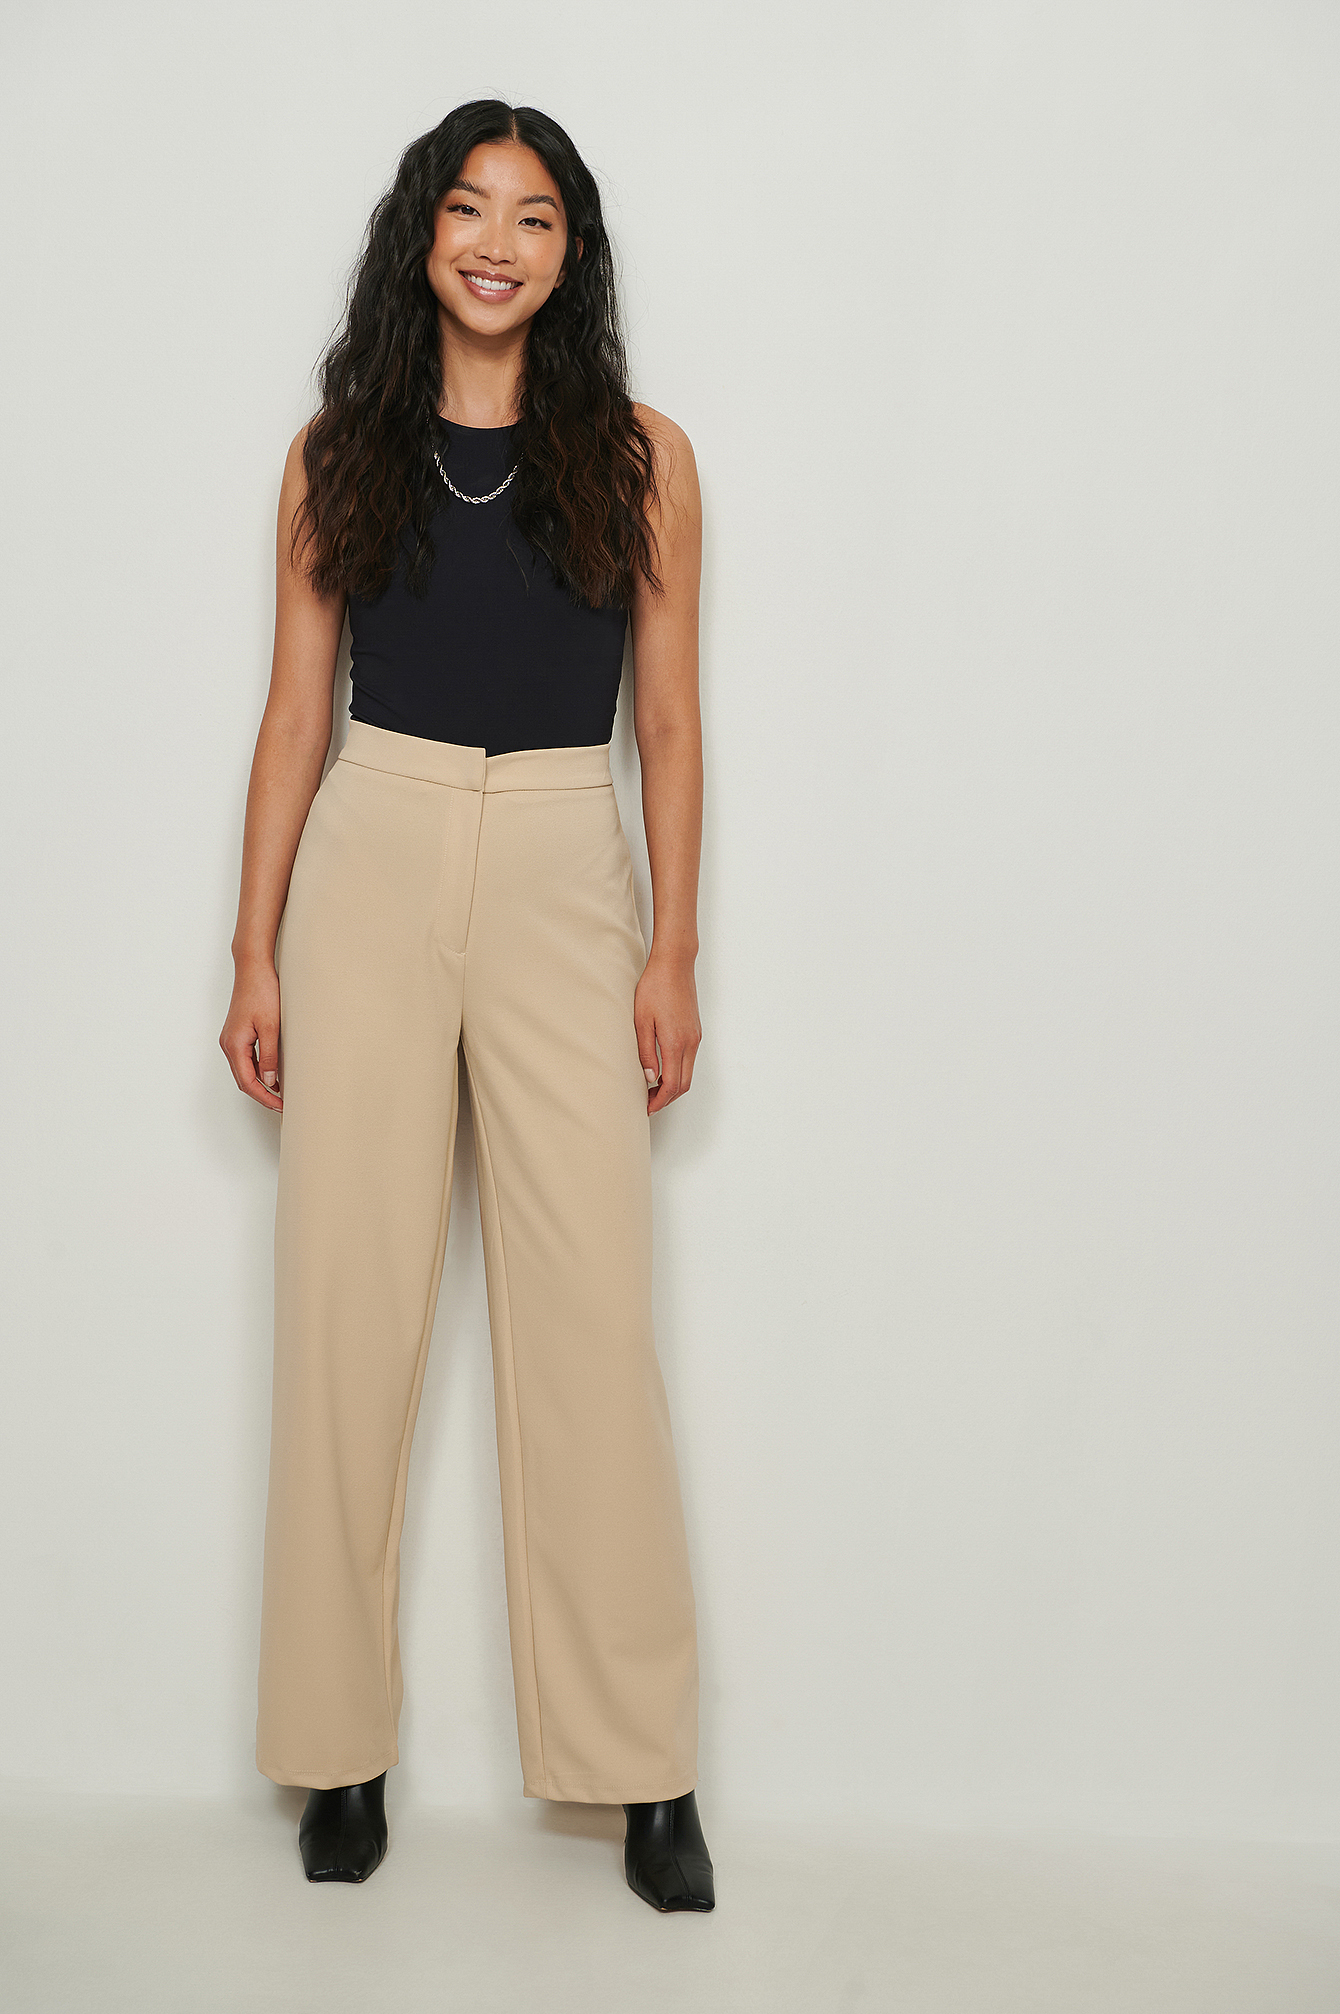 Tapered Jersey Suit Pants Outfit.